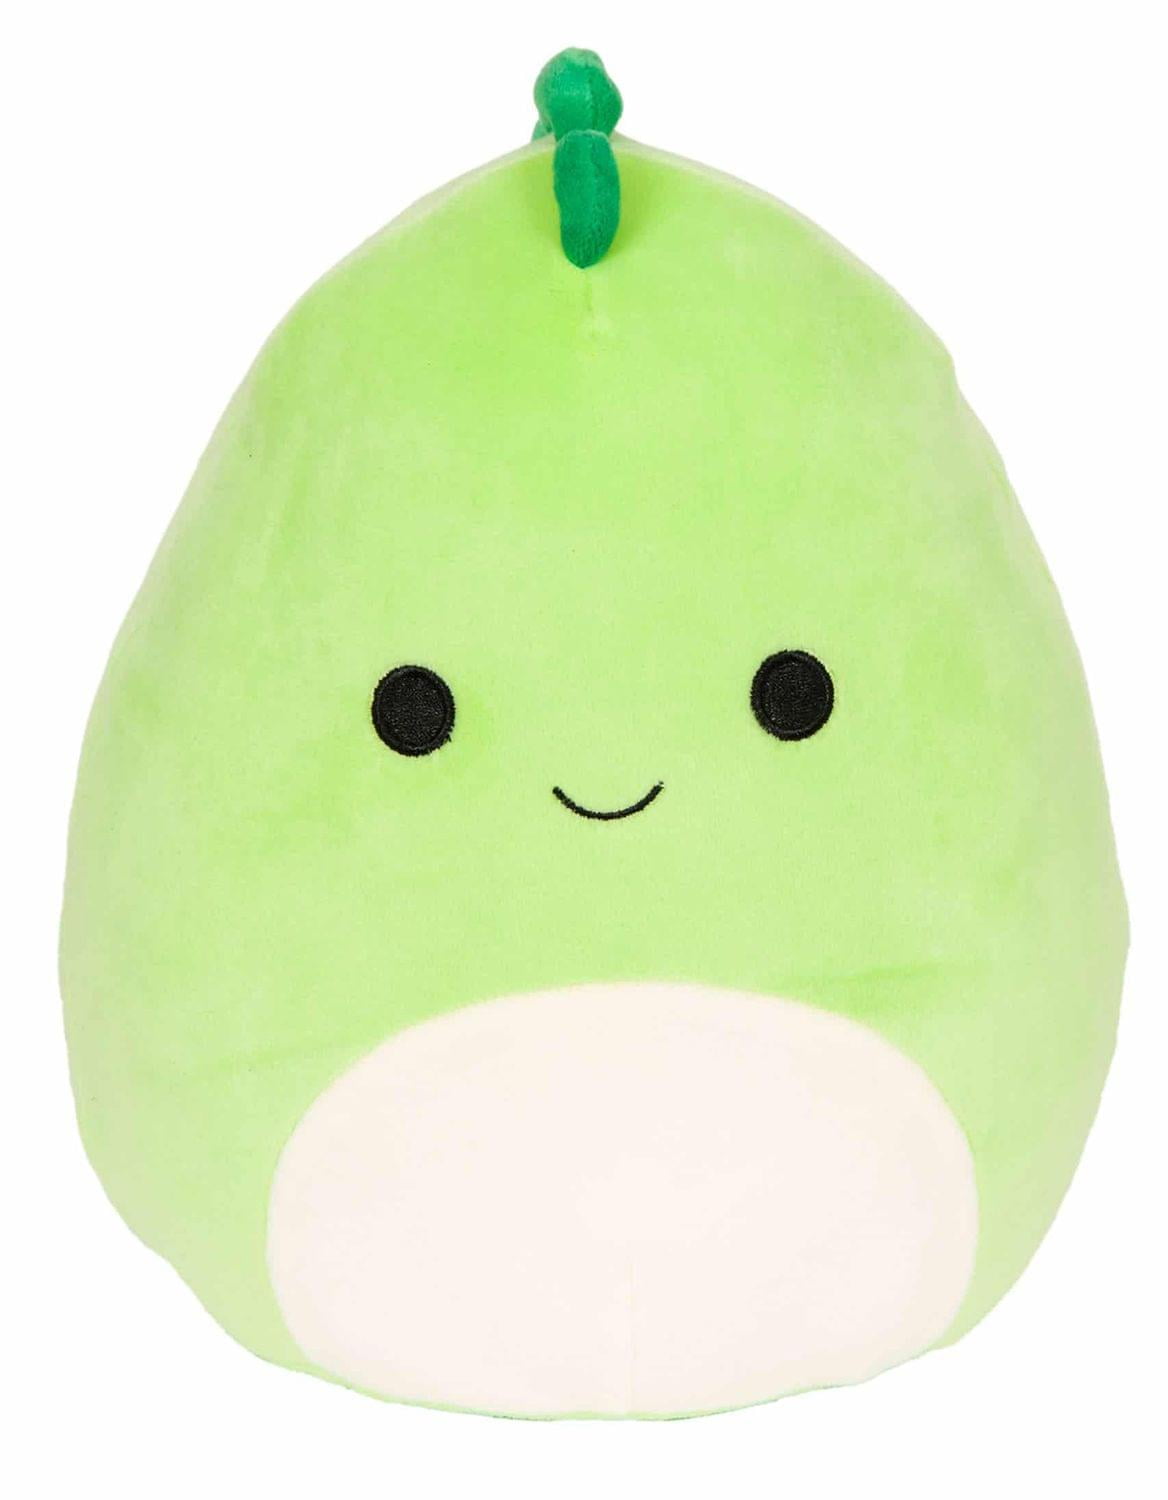 Squishmallow Danny the Green Dino 12" Stackable Plush Pillow 